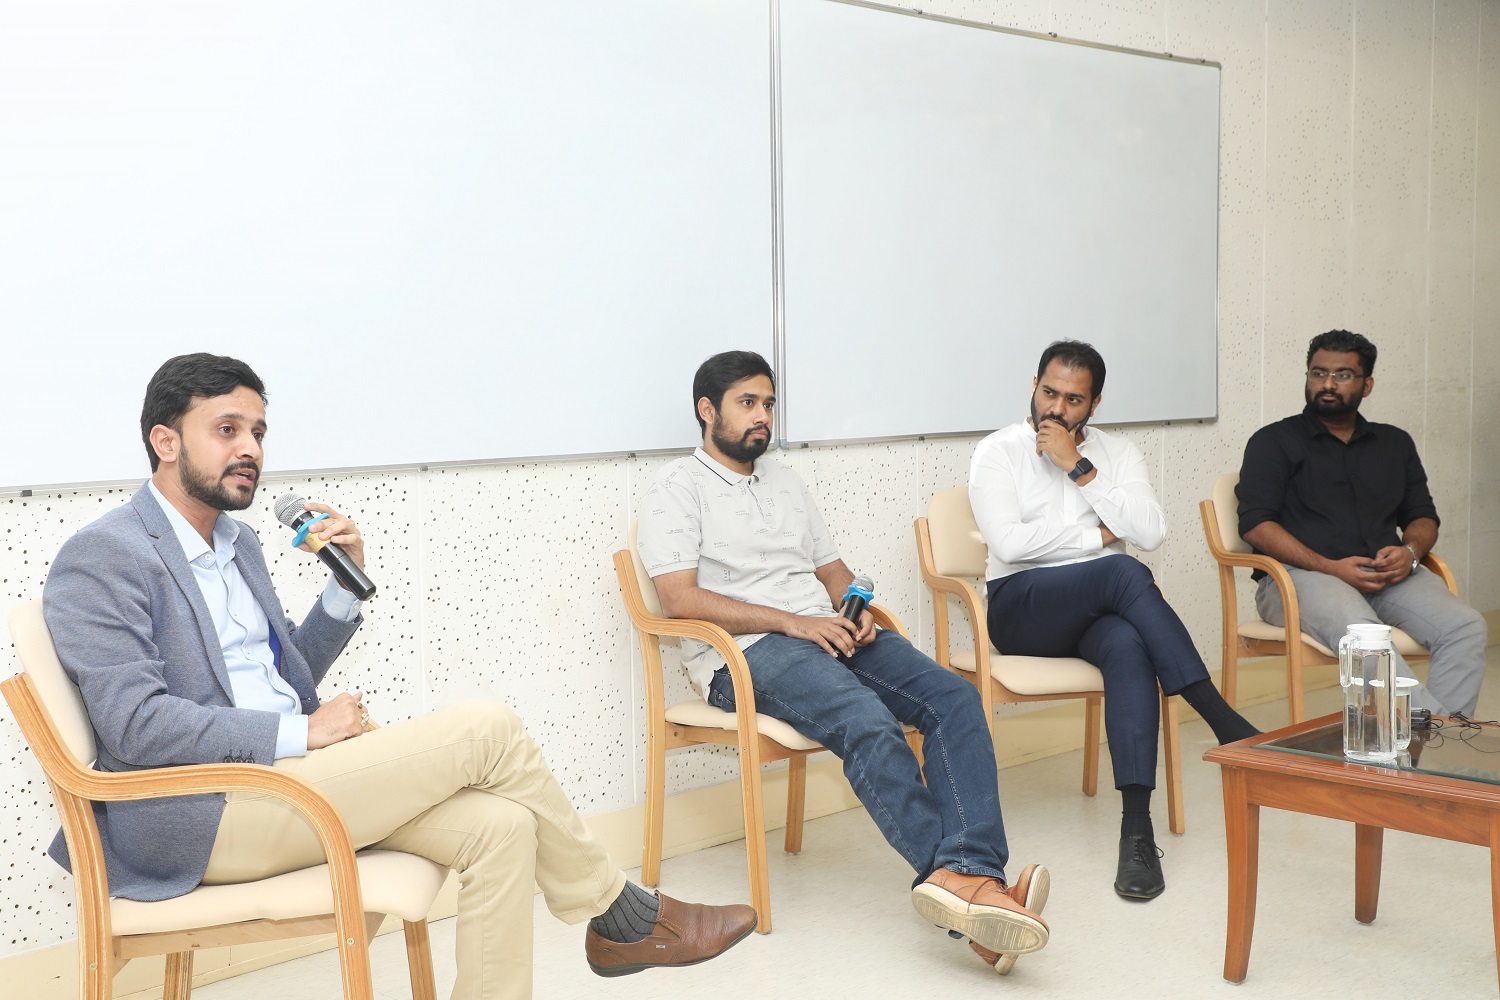 Vijay Nadiminti, CEO, AgHub moderated the panel discussion on ‘Data Analytics helping improve Farmer experience’ as part of Go Agri organised by NSRCEL on July 20, 2022. (L-R) Vijay Nadiminti; Sagar Satya, Senior Analyst, Omnivore; Kanishka Chatterjee, Social Innovation, The/Nudge Prize and Atthri Anand, CEO & Co-founder, Deep Flow Technologies.